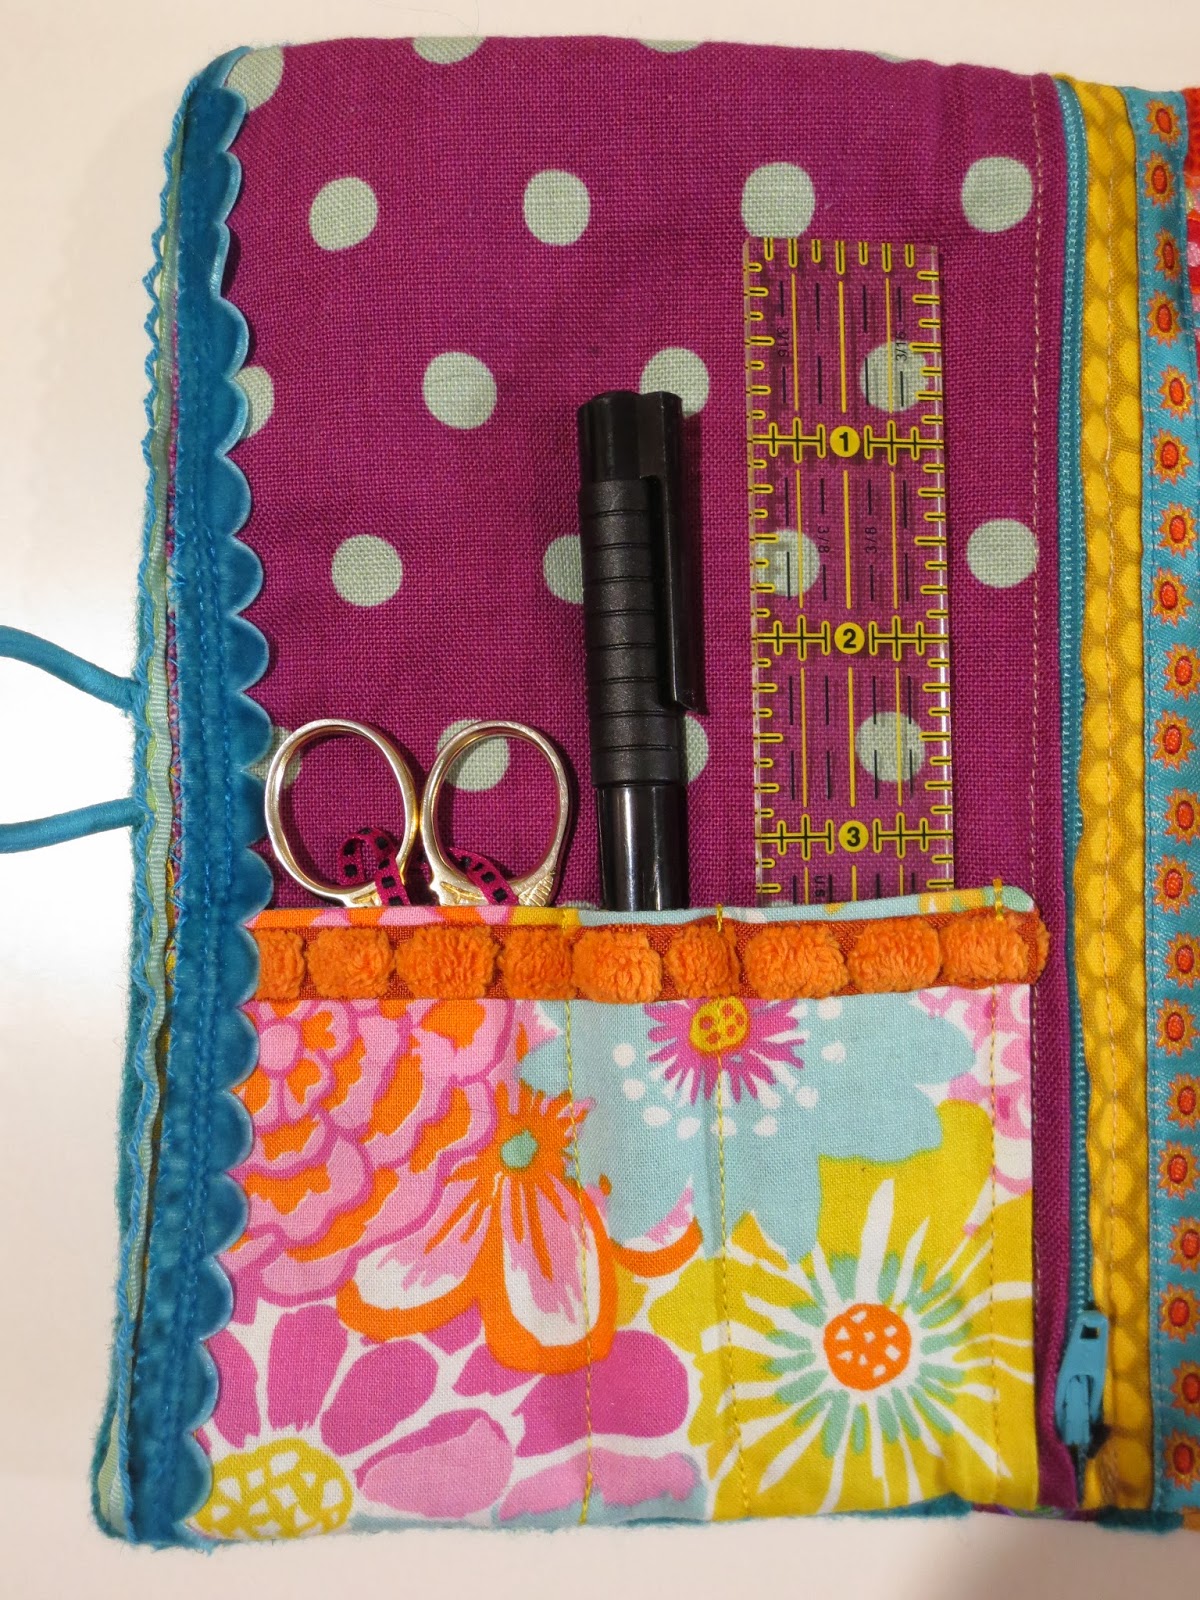 Art Journey: Wool Embroidery on a Sewing Kit